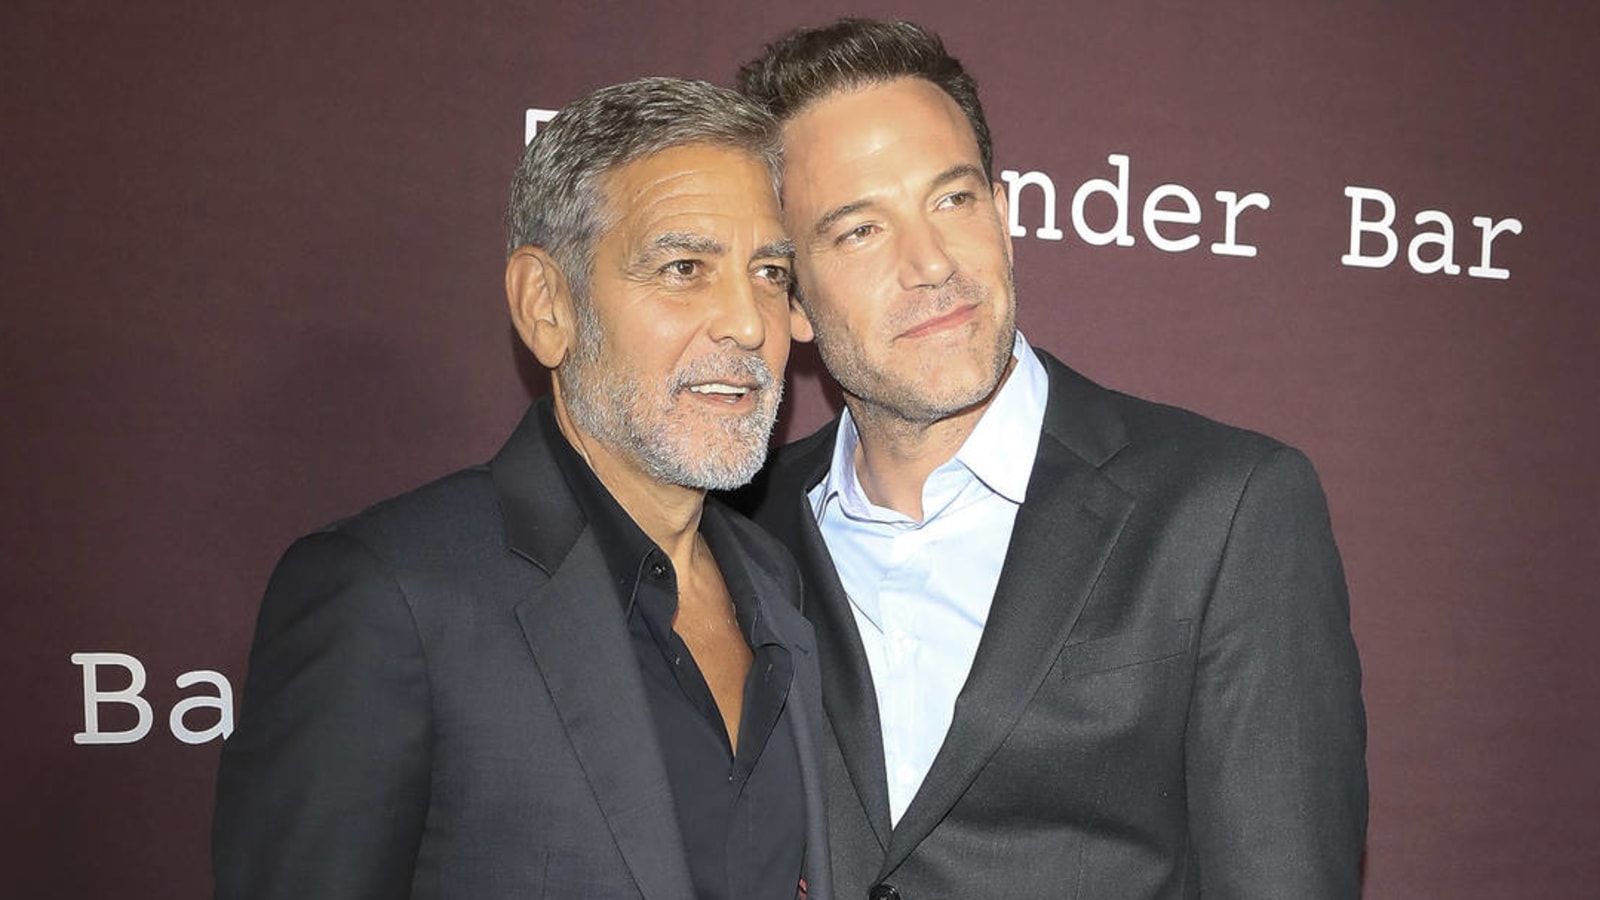 Watch the heartwarming trailer for George Clooney's 'The Tender Bar' starring Ben Affleck